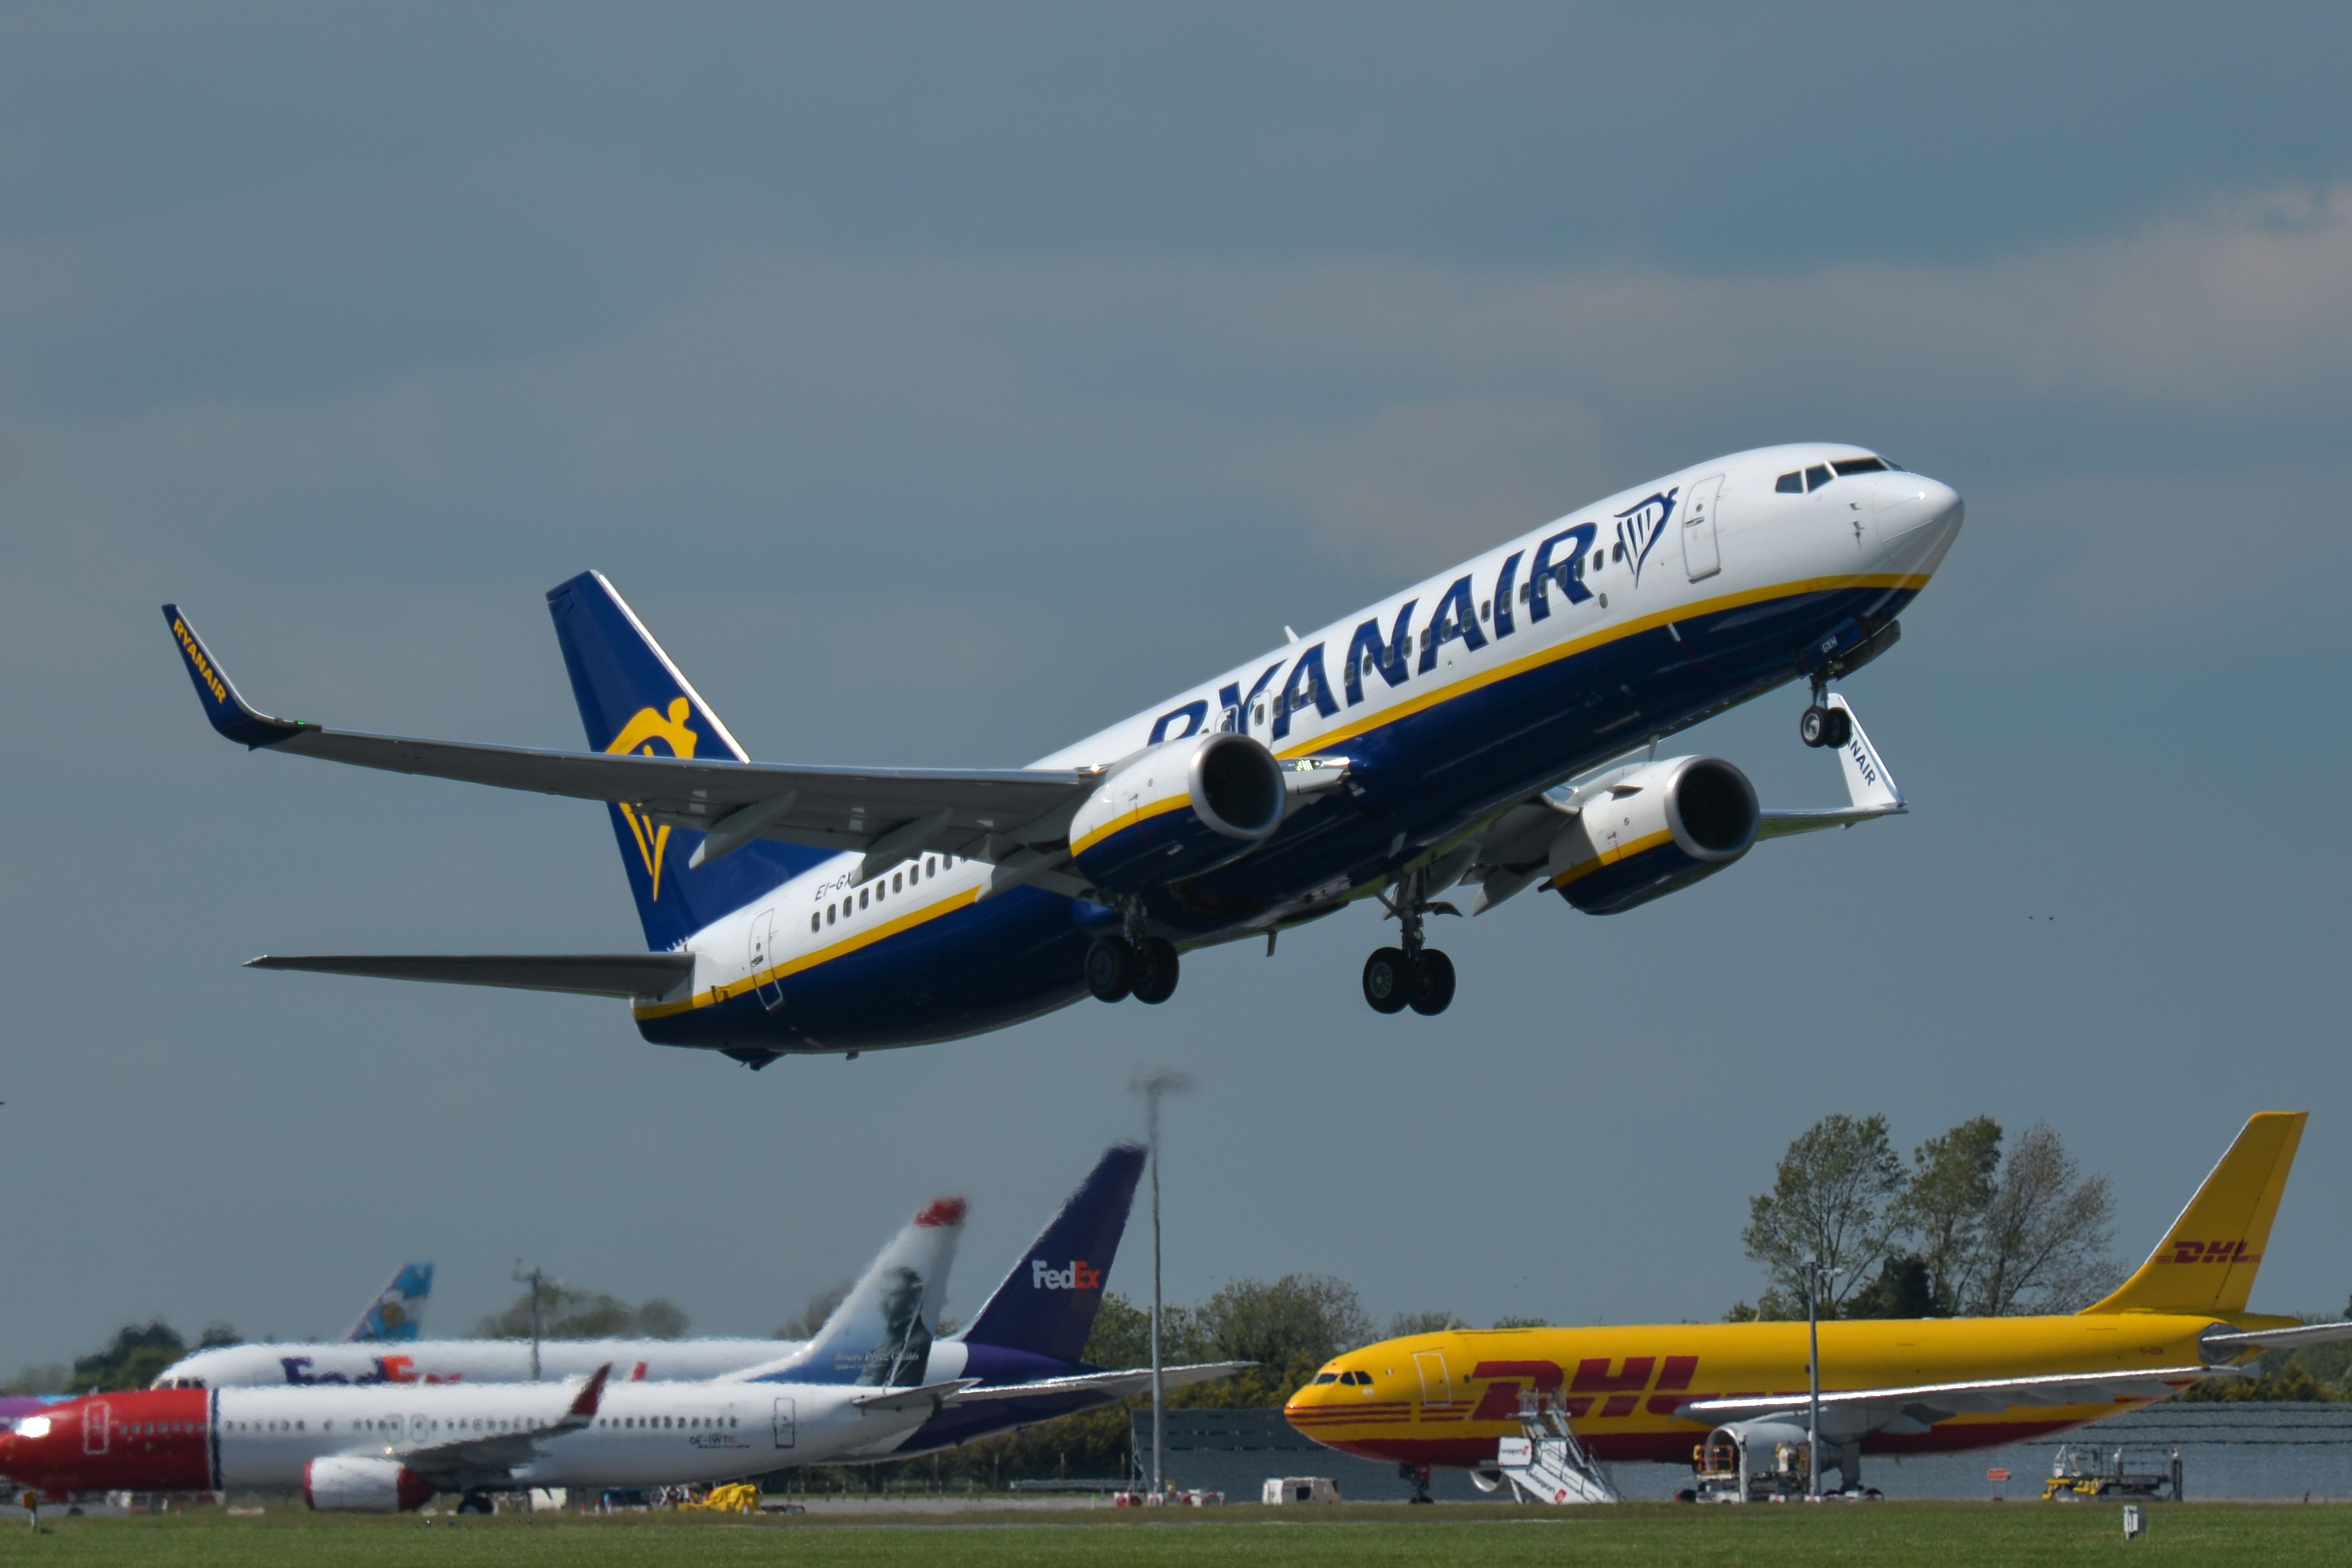 Ryanair Boeing 737 taking-off from Dublin Airport